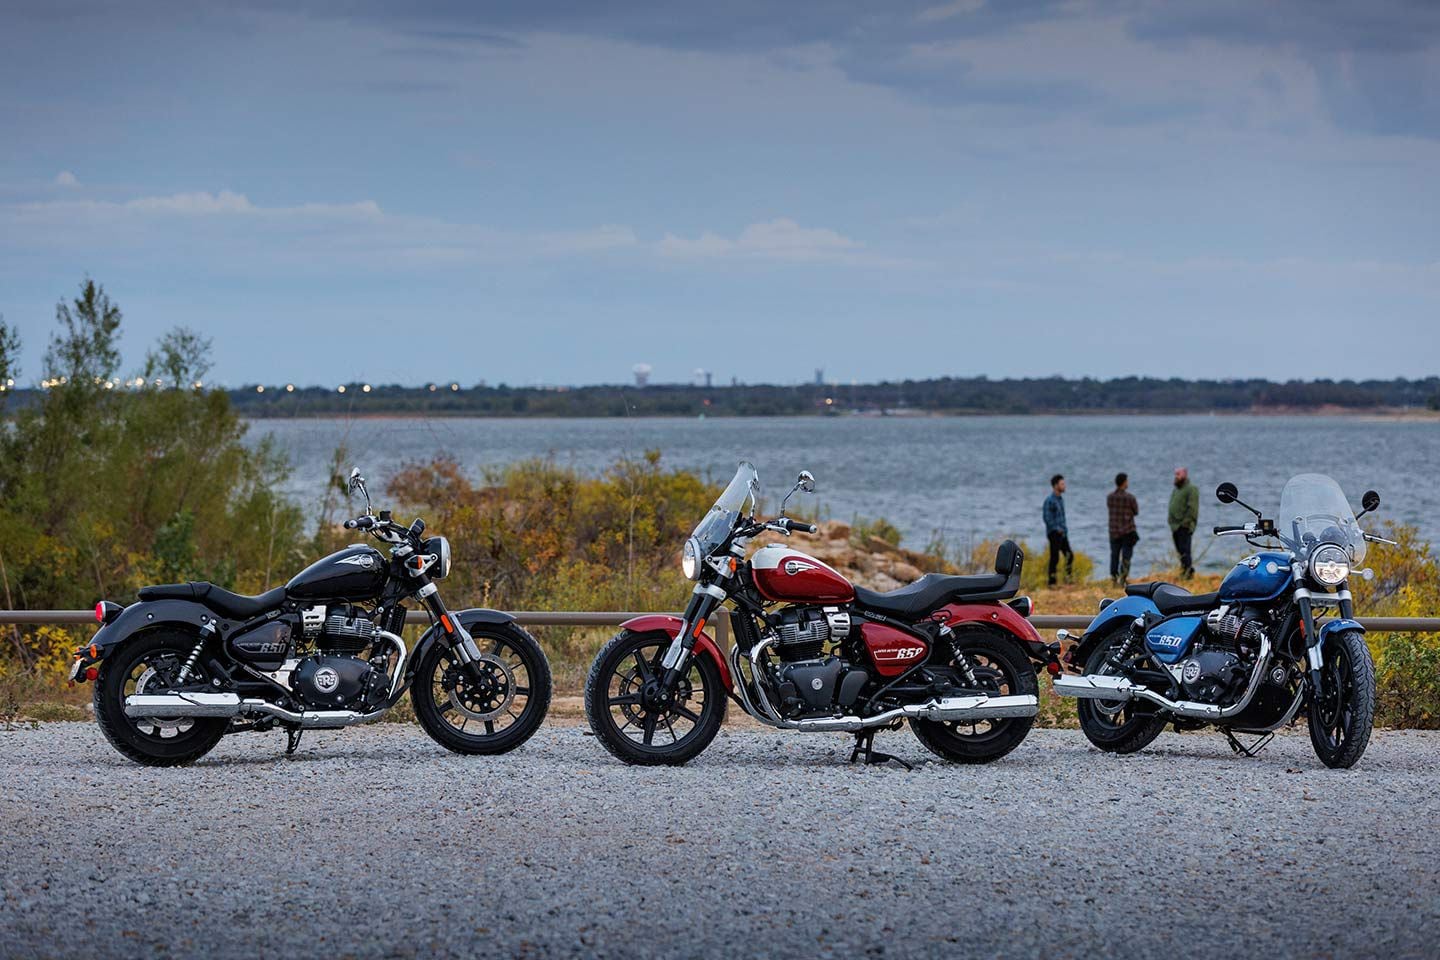 The Royal Enfield Super Meteor 650 model lineup.